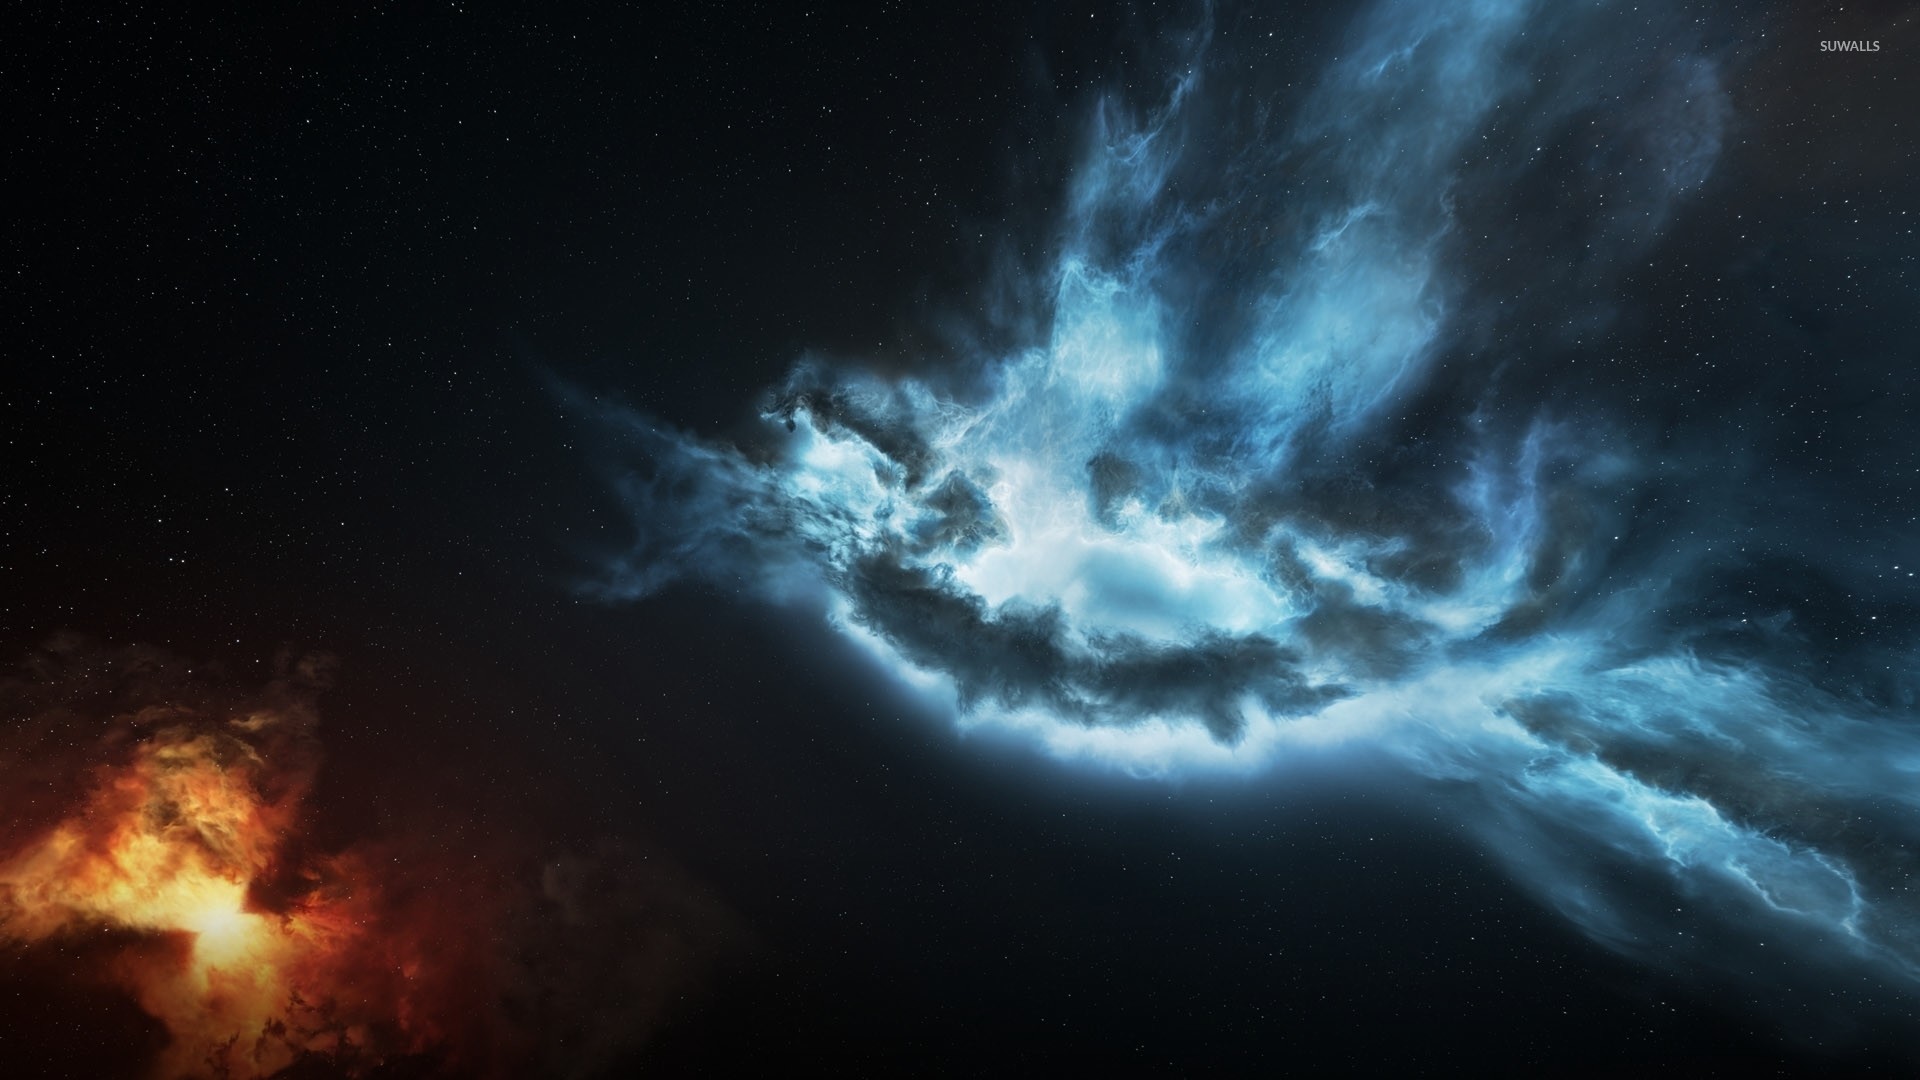 Explore Wallpaper Space, Fire And Ice, and more Red and blue